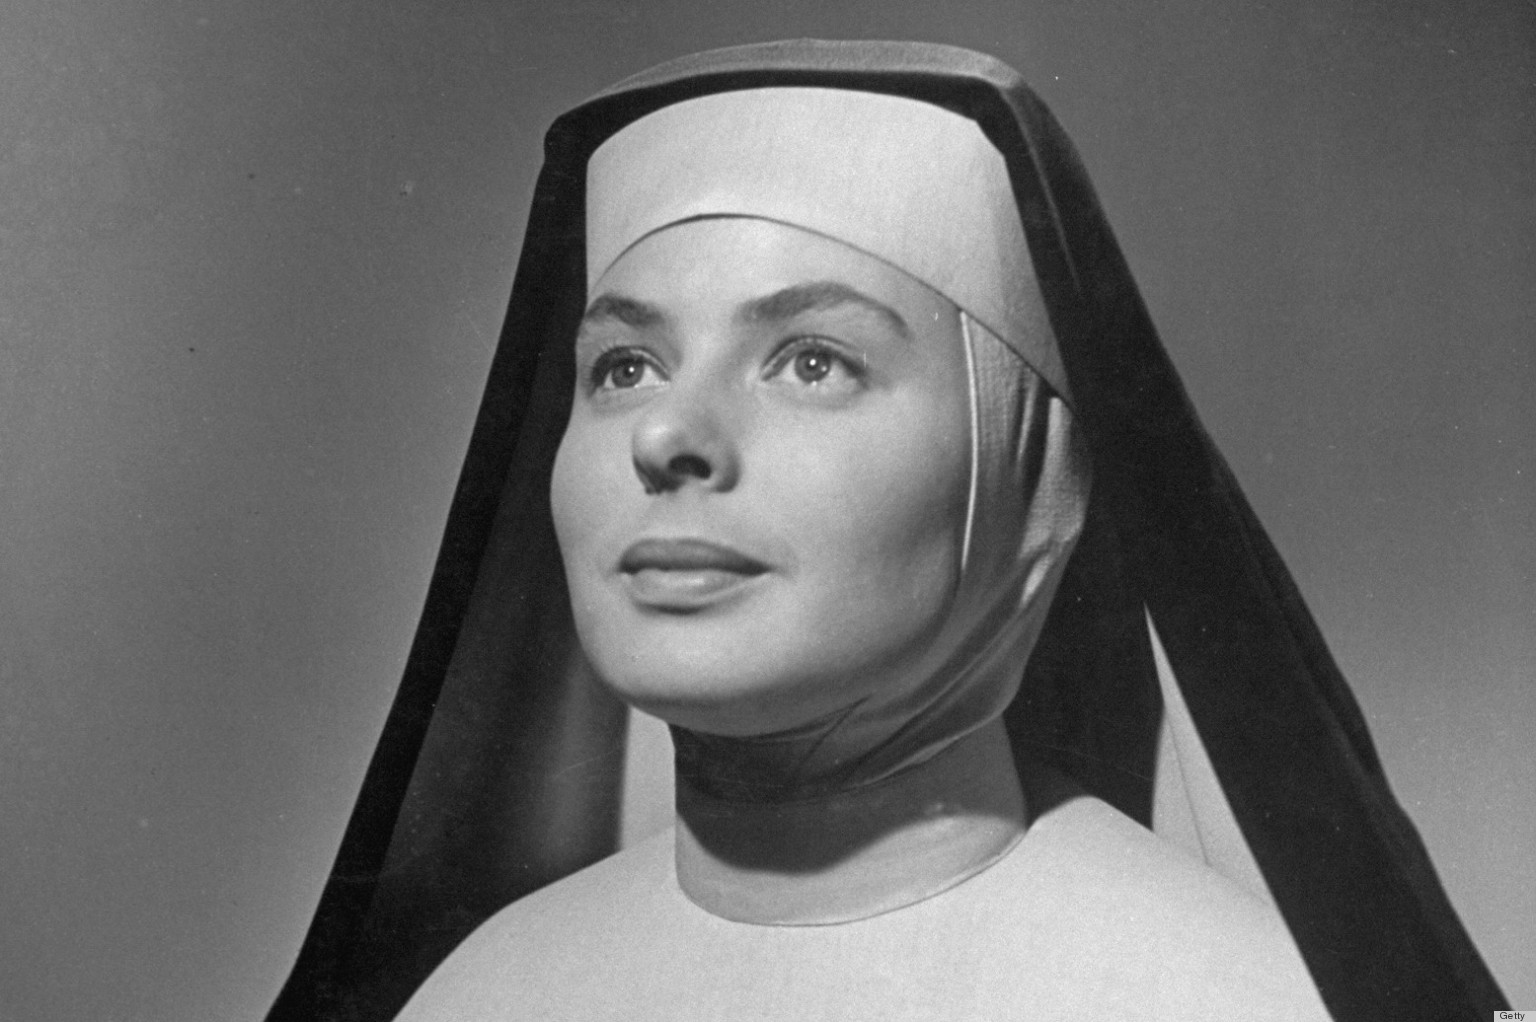 Nun Habits: How Women Of The Cloth Express Their Own ...